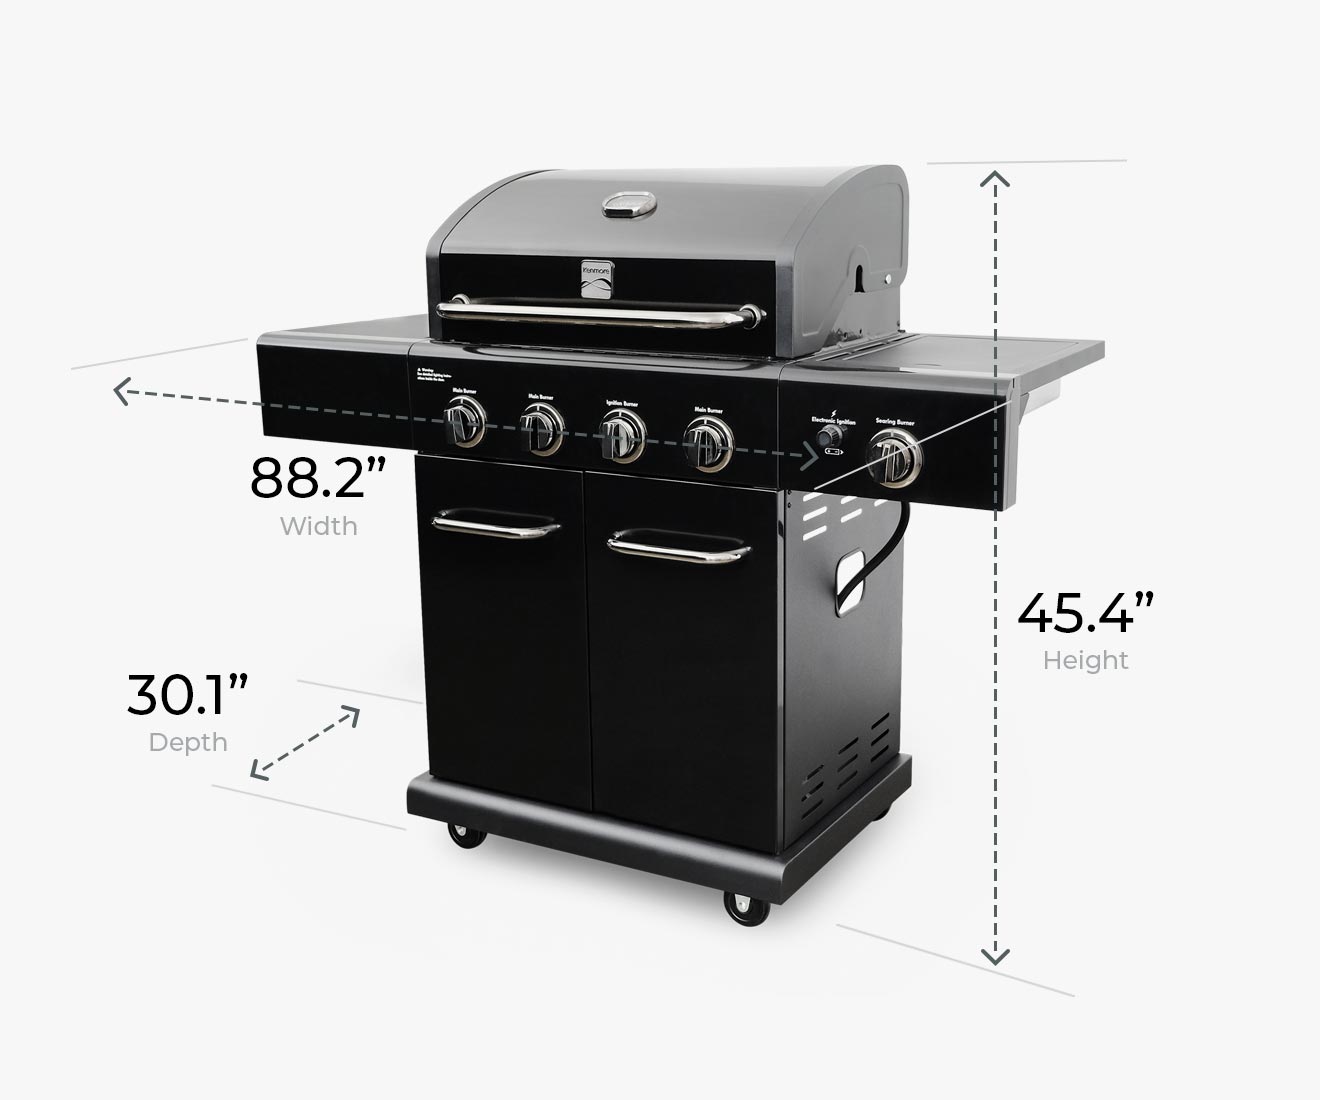 Kenmore 4-Burner Gas Grill with Side Searing Burner Barbecue Barbeque BBQ Grill for Outdoor Outside Cooking PG-40409S0LB-1 in Black with Chrome Accents Compact Dimensions